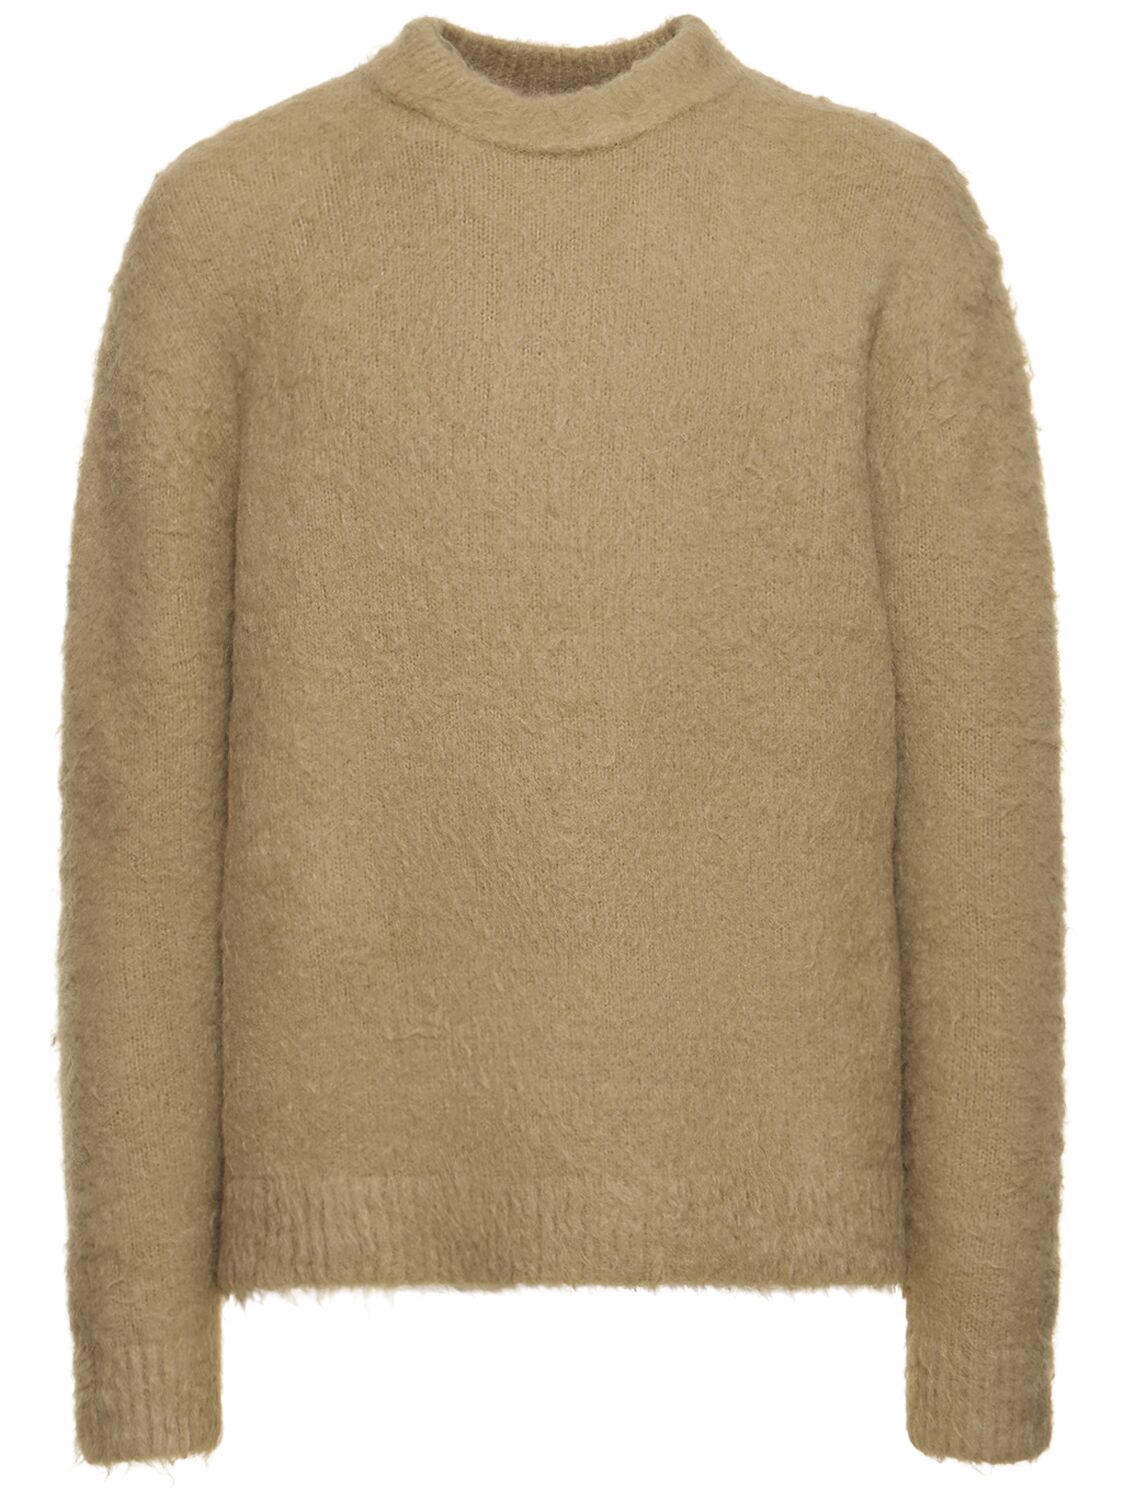 Image of Kameo Brushed Wool Blend Knit Sweater